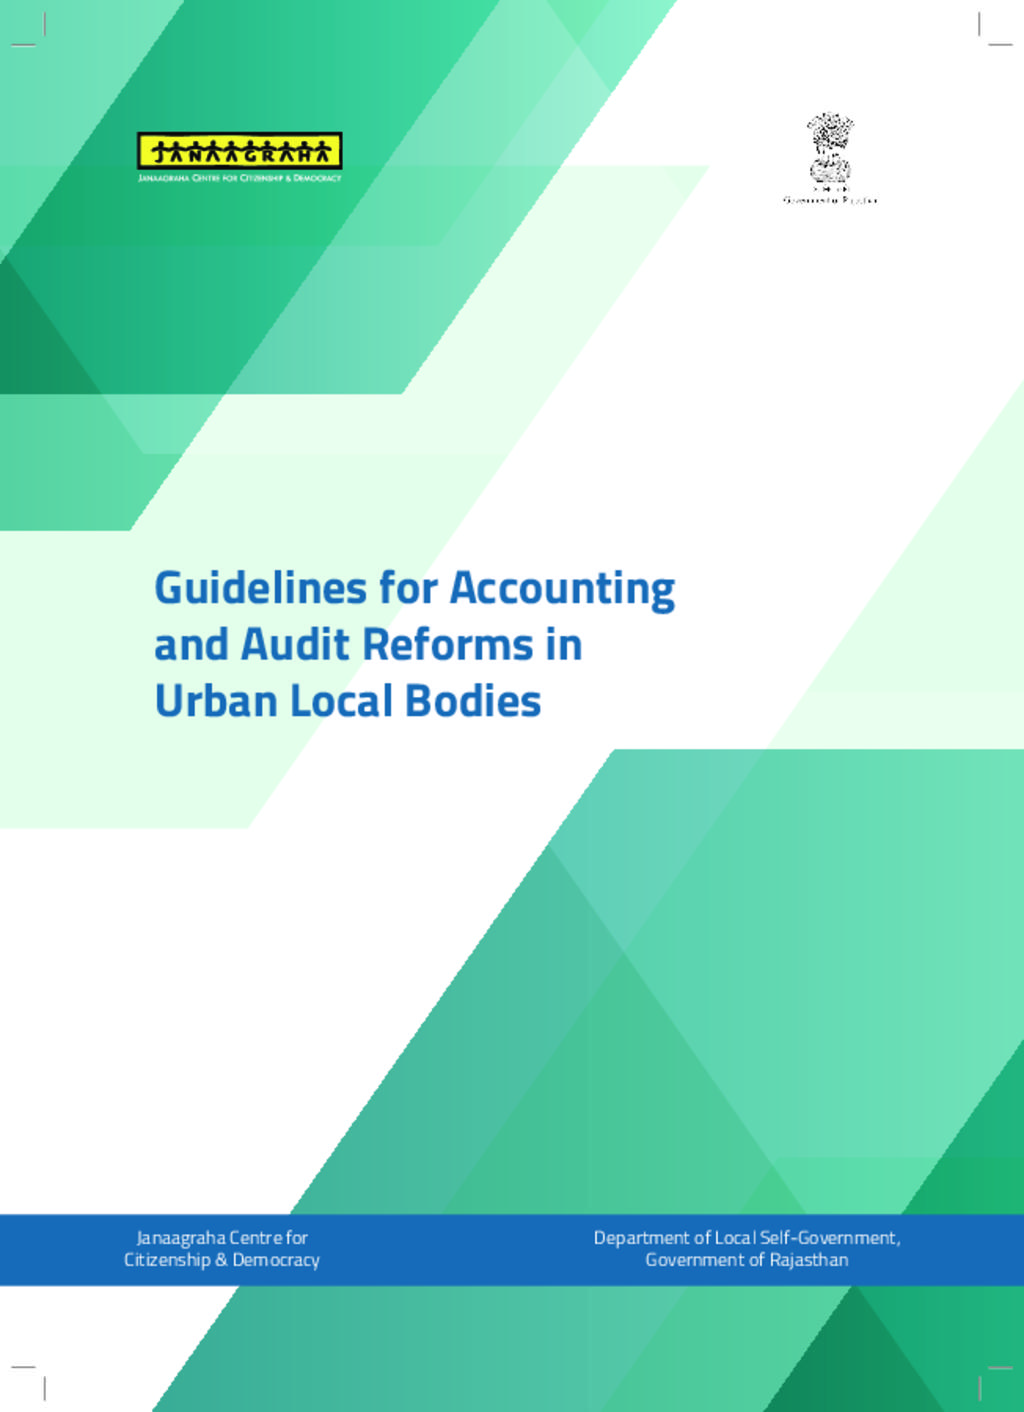 Guidelines on Accounting and Audit Reforms